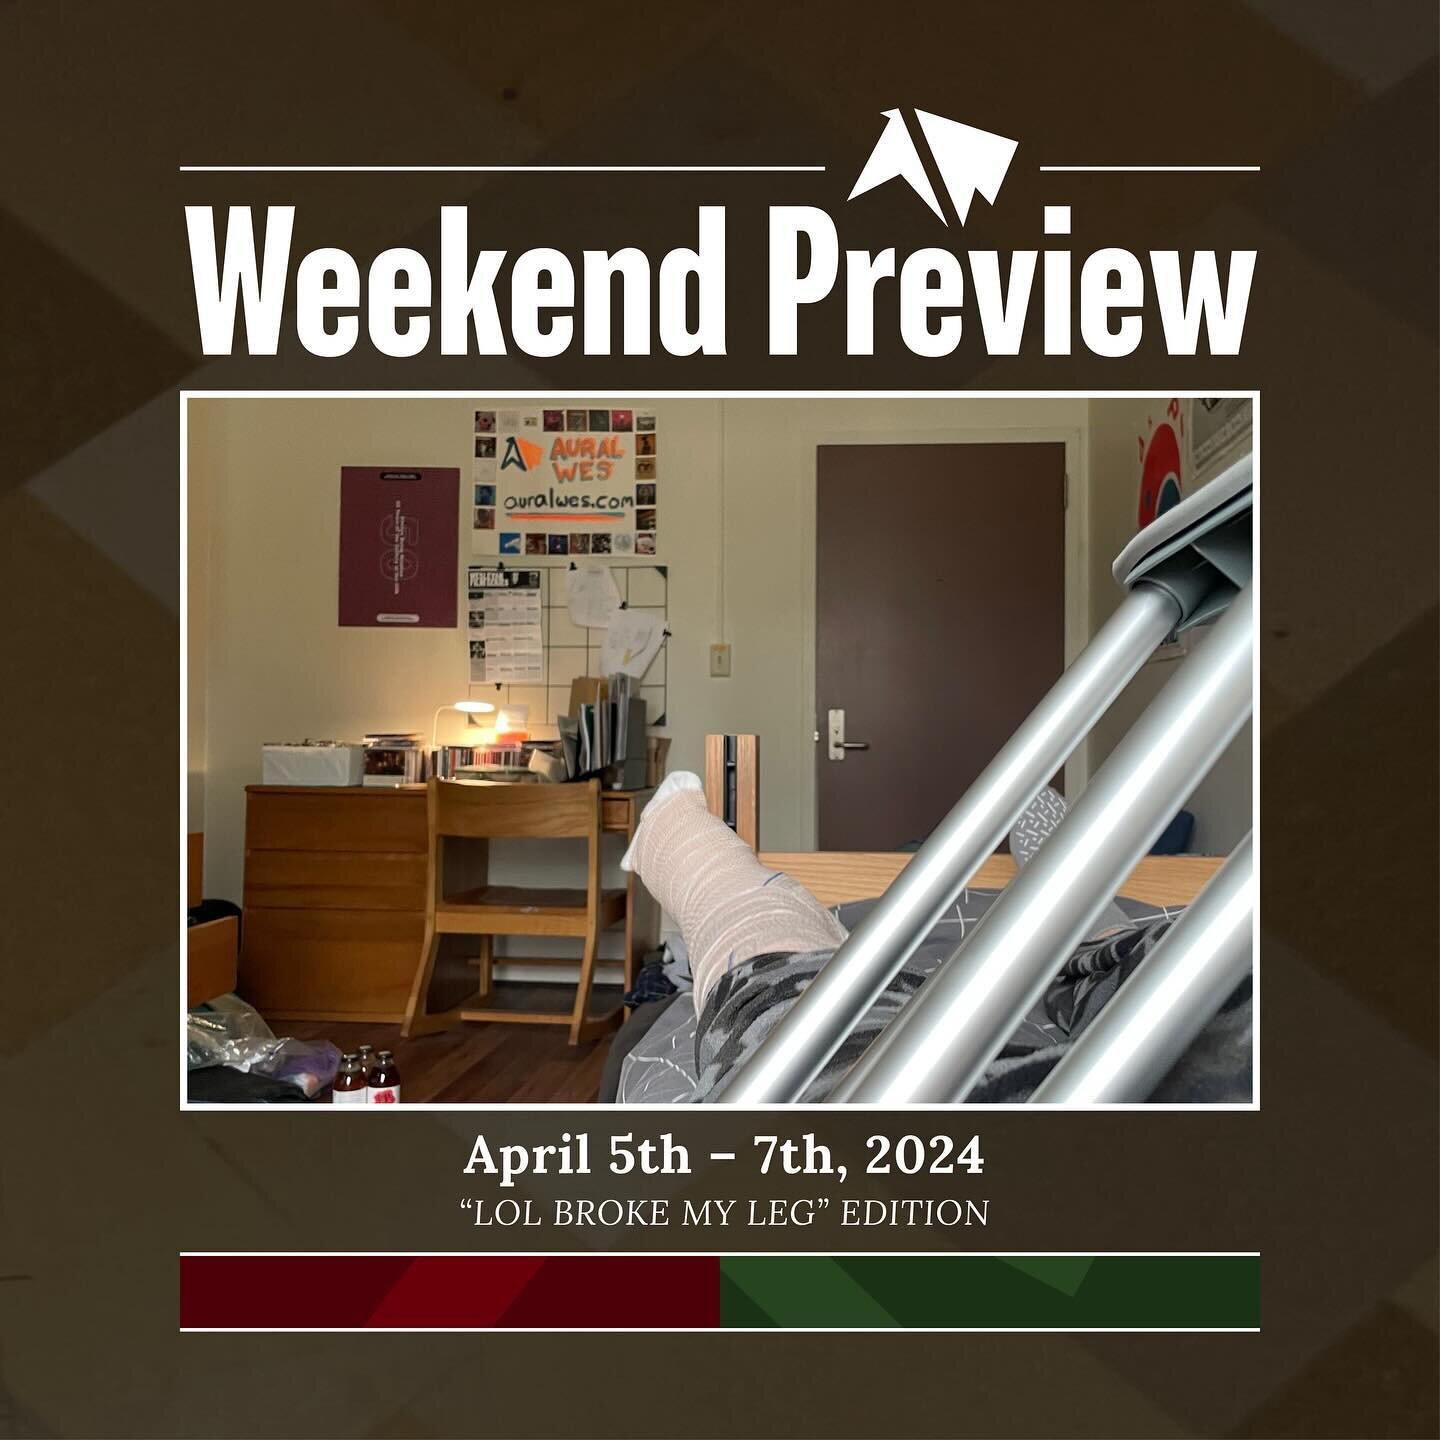 Weekend Preview 4/5 &ndash; 4/7/2024

well i&rsquo;ve gotten myself into a bit of a pickle, haven&rsquo;t i? i slip on some wet grass on the way to the S&amp;C and now i have to &ldquo;get metal plates installed&rdquo;. anyway yeah i&rsquo;m going un